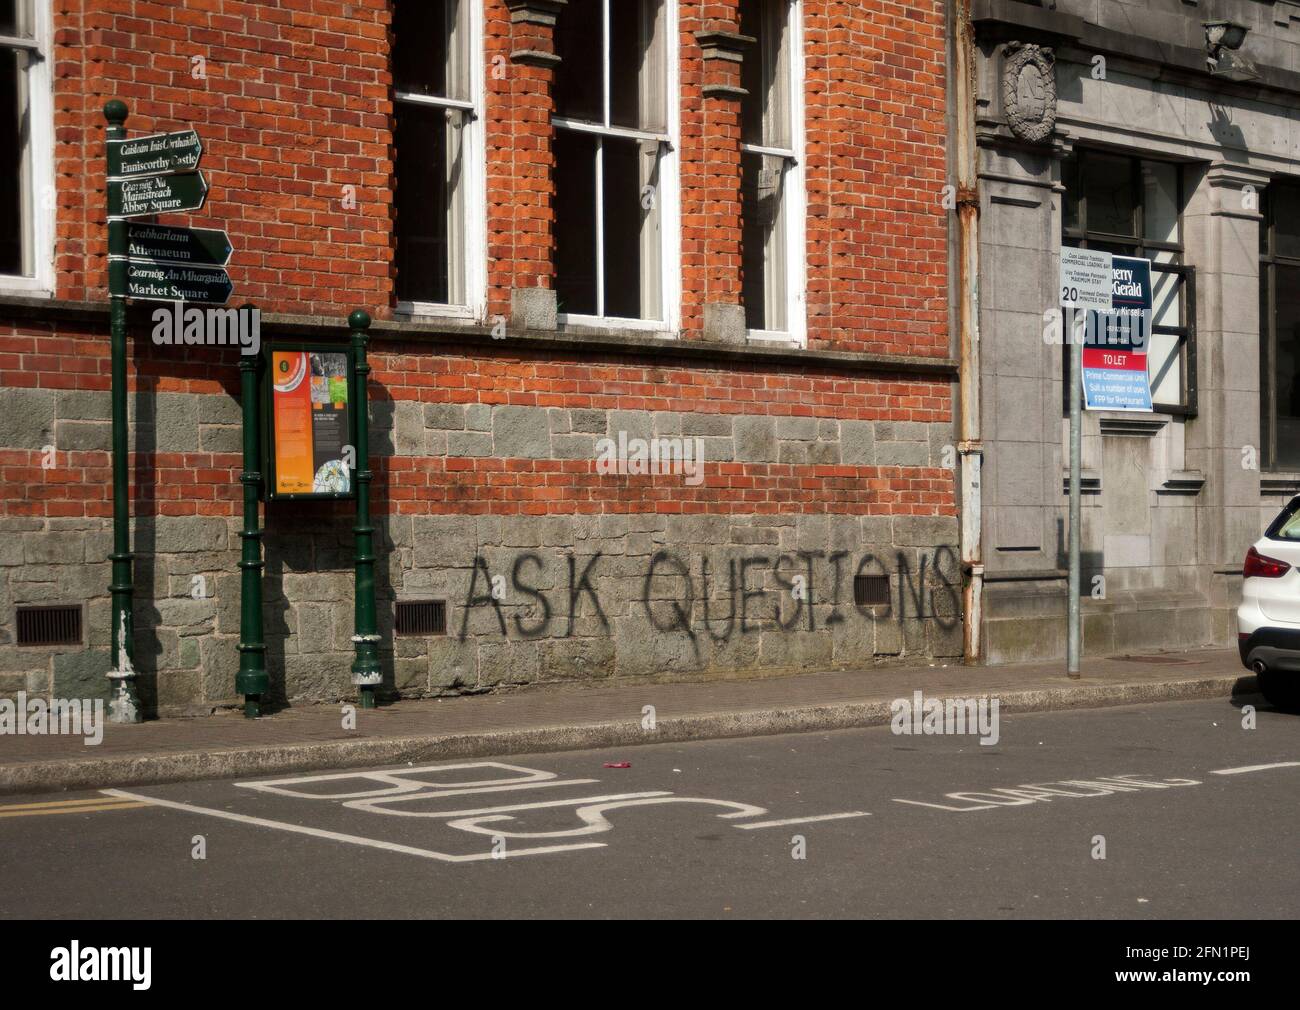 'Ask Questions' graffiti sign, Enniscorthy, County Wexford, Ireland, Europe Stock Photo